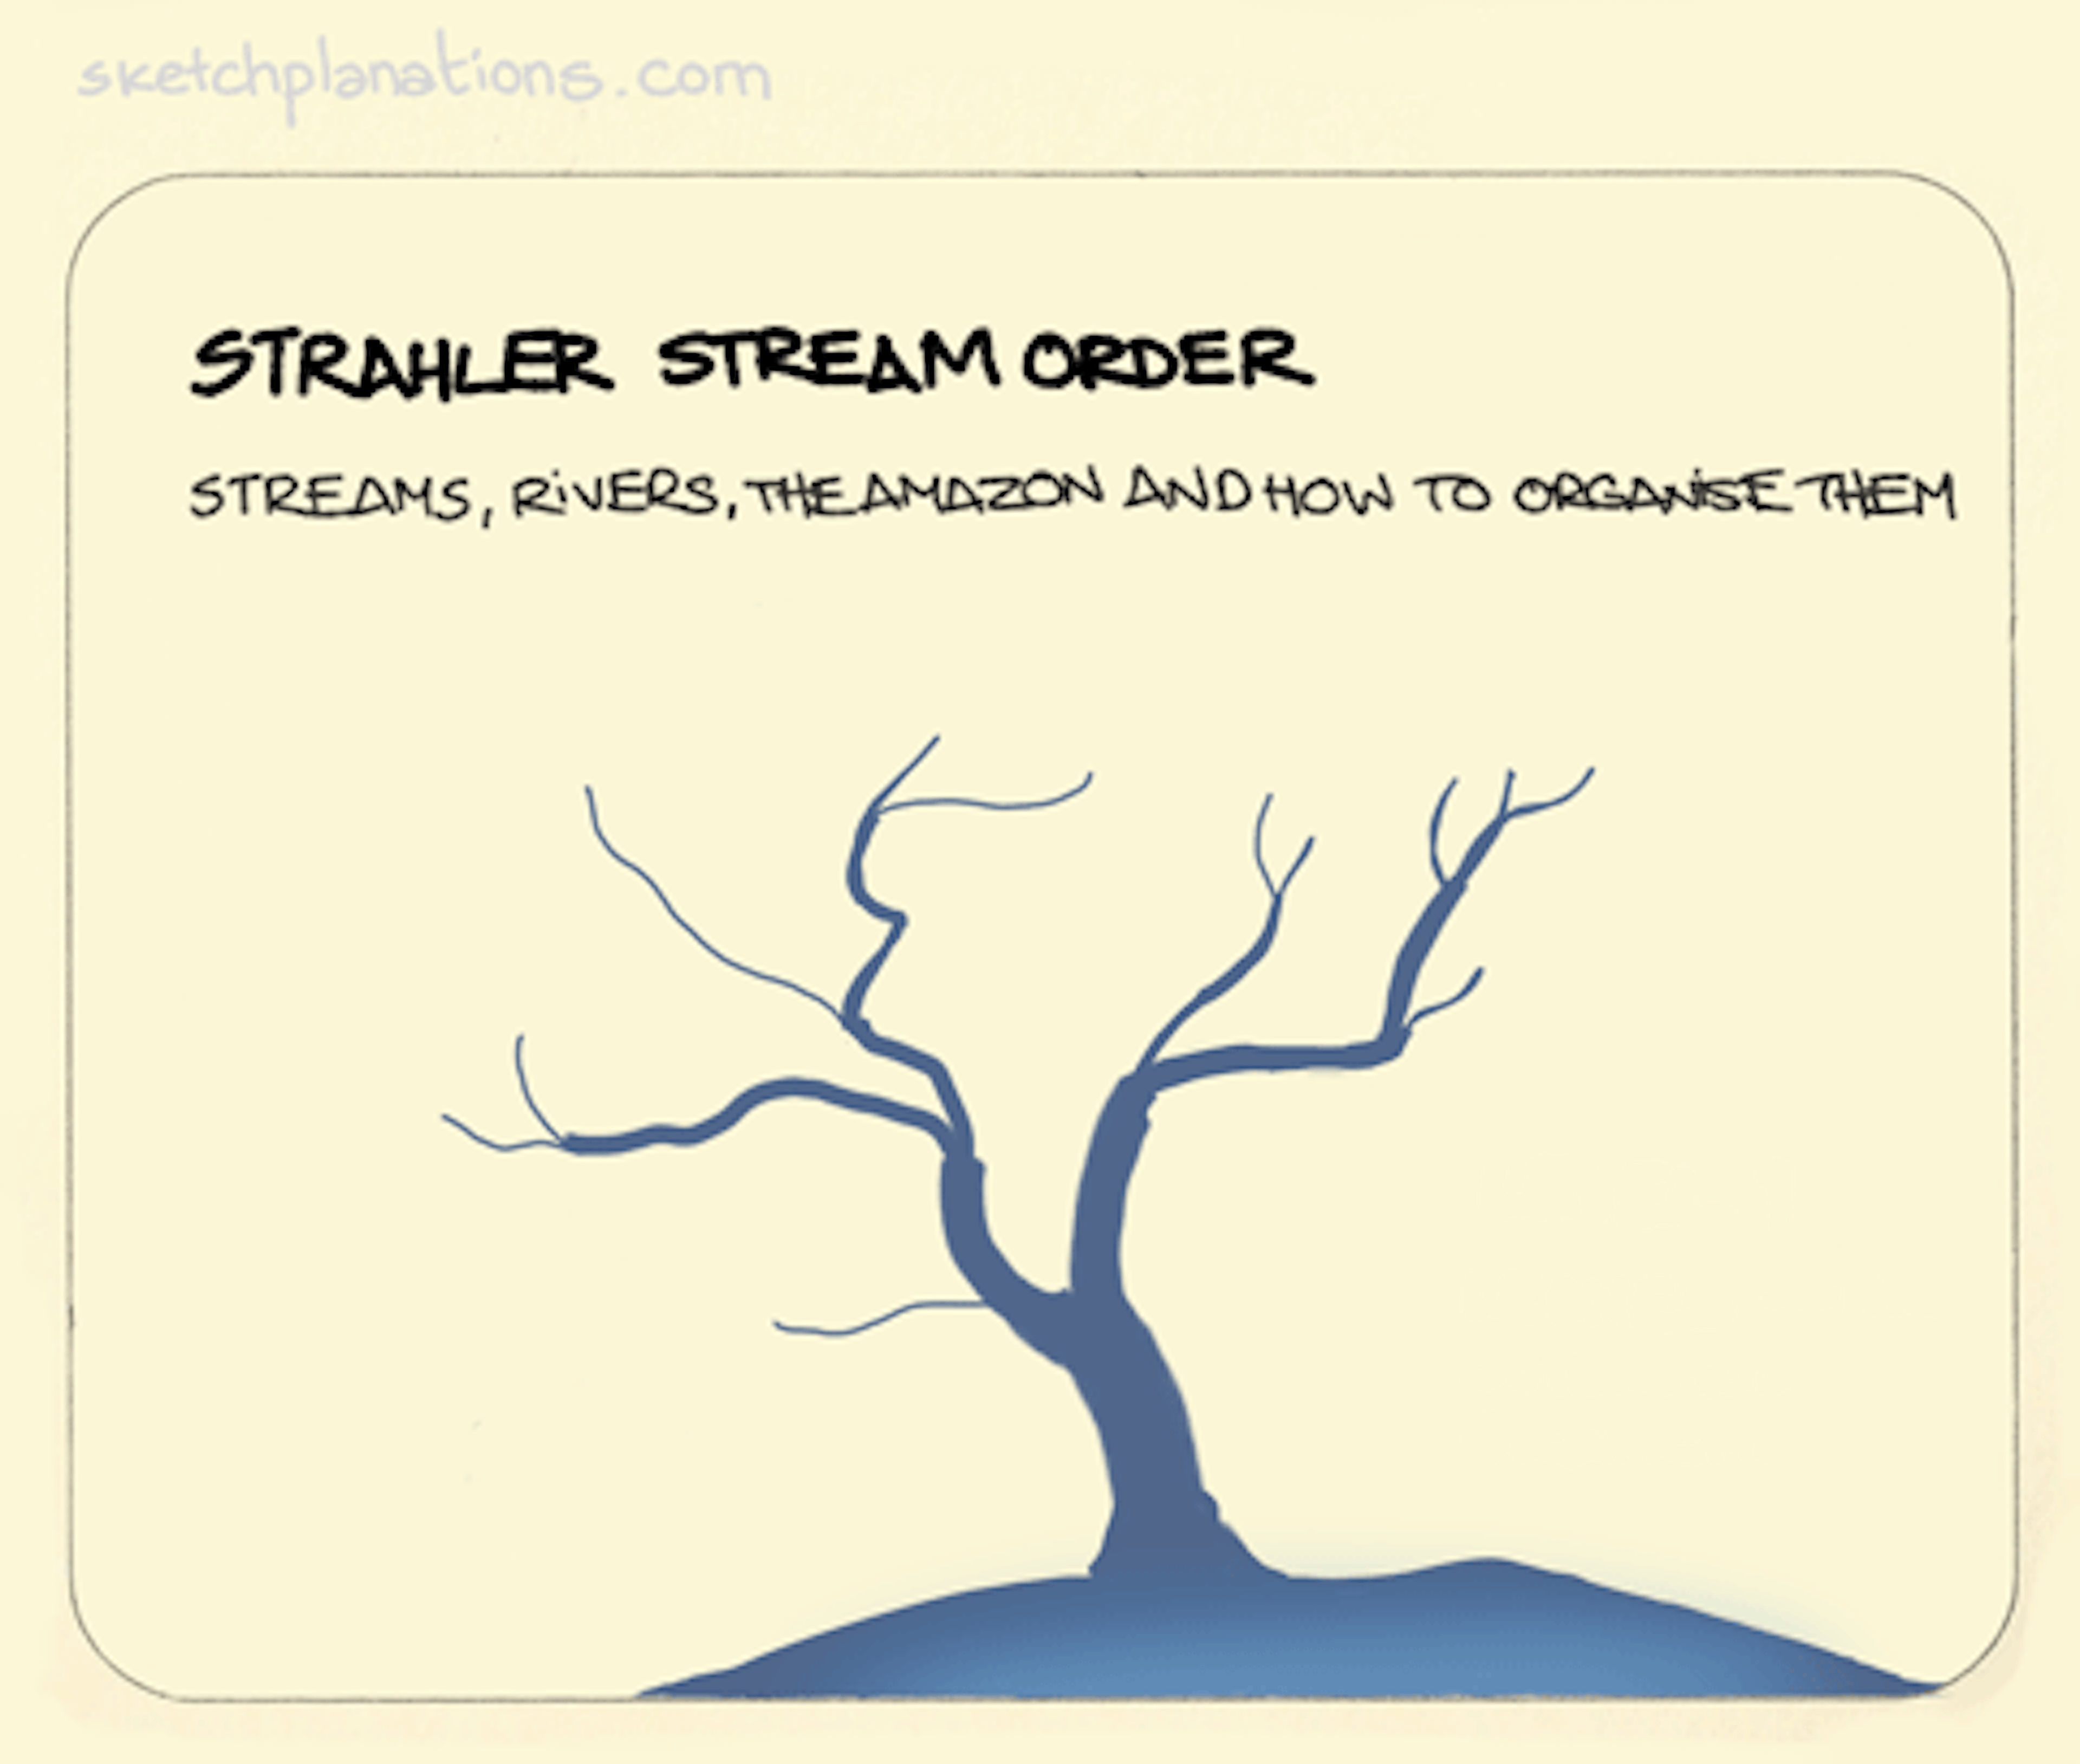 Strahler Stream Order animation: what looks like the silhouette of a tree with branches but no leaves, is actually a plan view of a large river network. Starting at the outermost, narrowest parts, each time two tributaries of the same order merge together the order of river size increases until it flows out into the sea. 